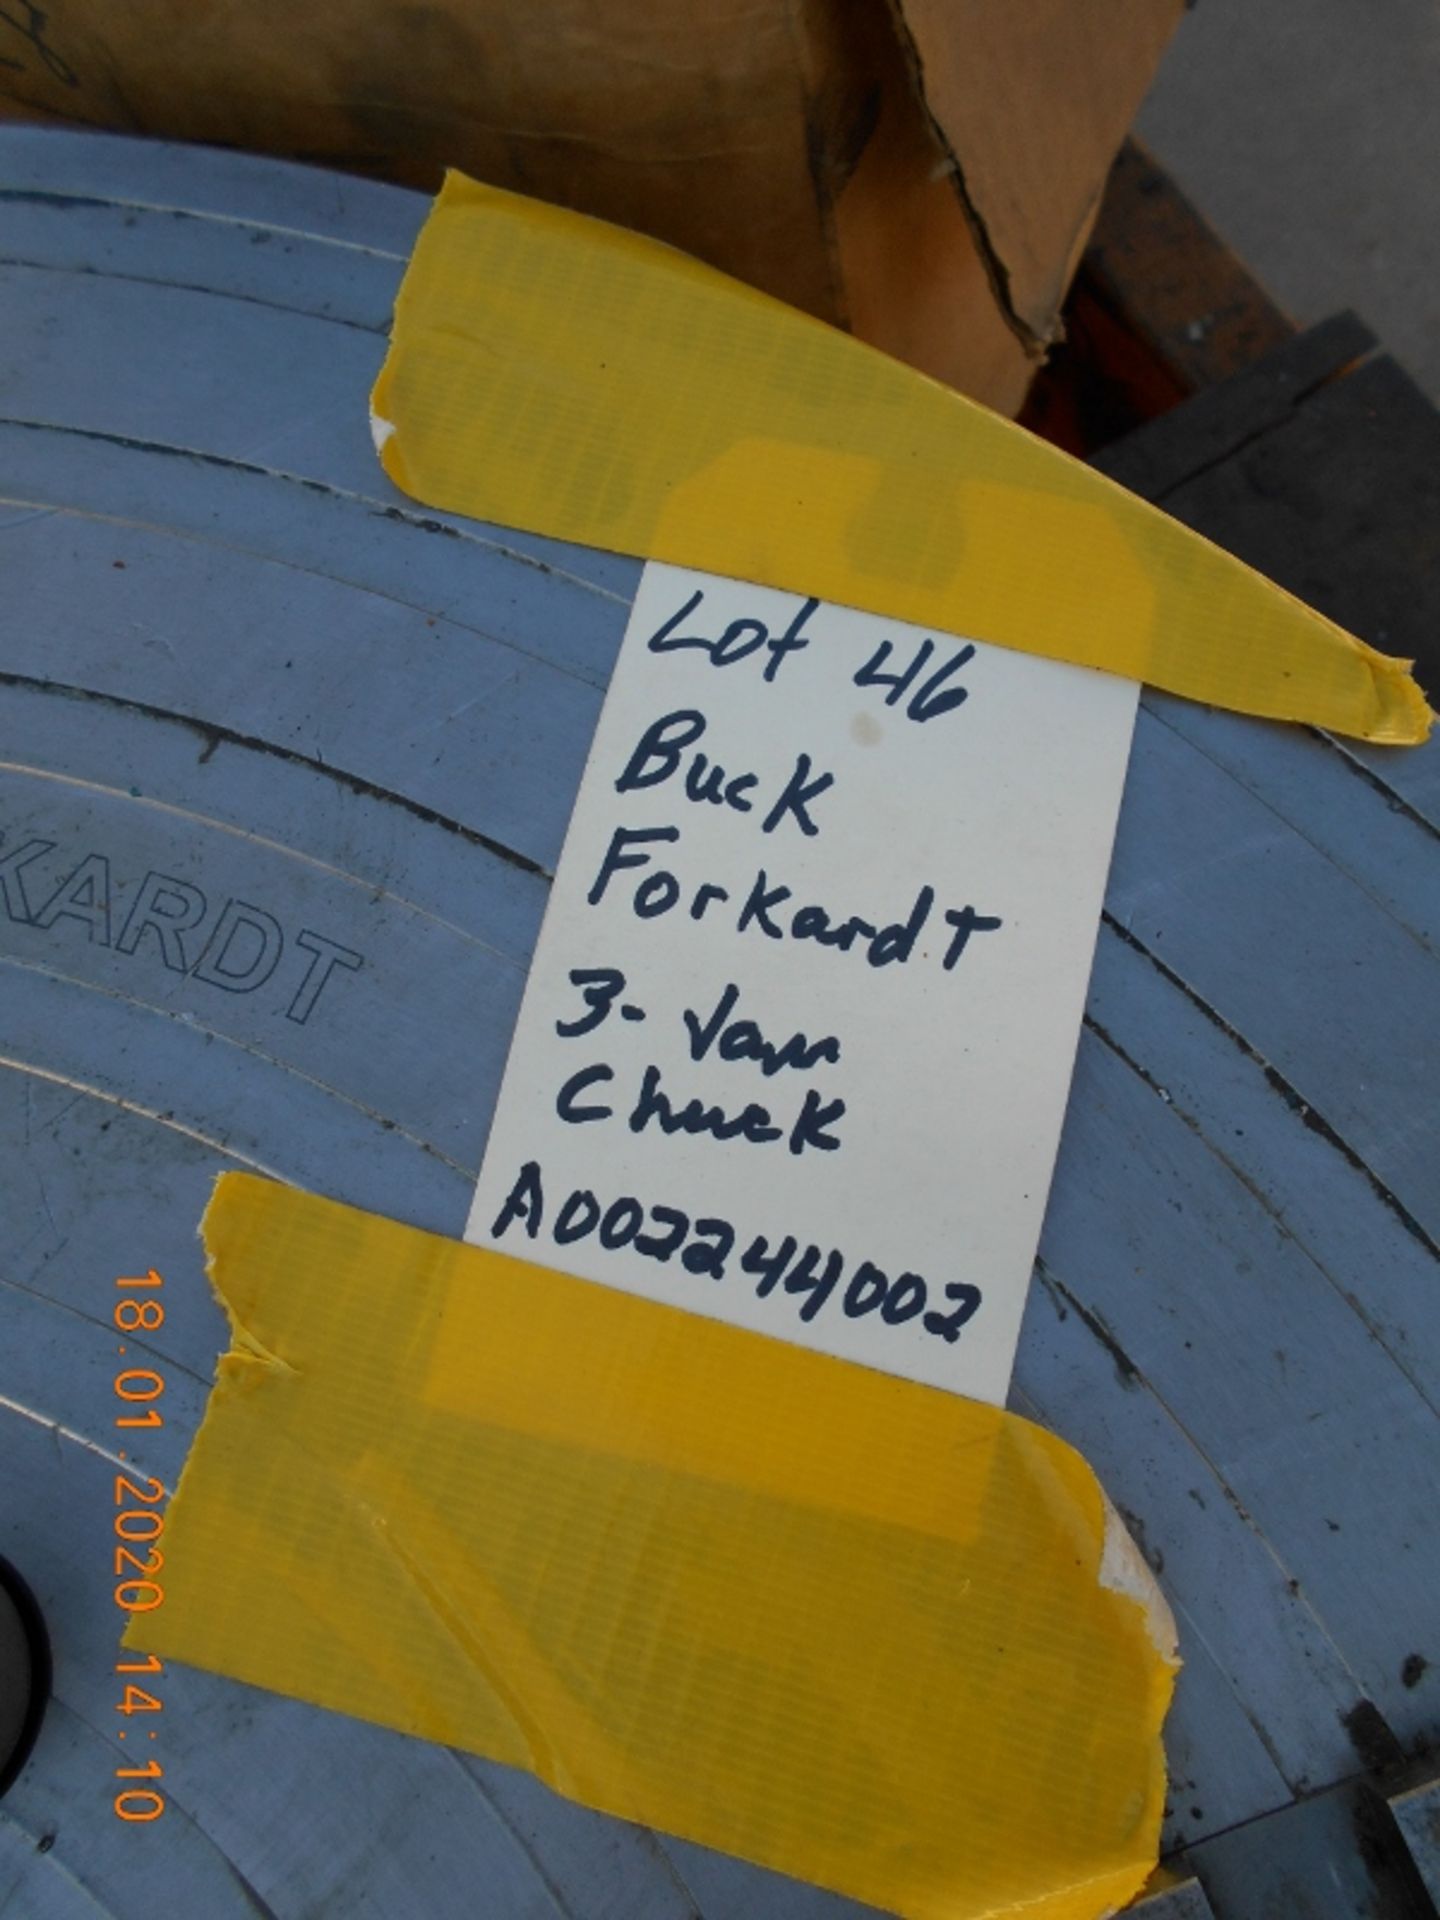 Buck Forkardt 3 Jaw Chuck, A002244002 - Image 2 of 3